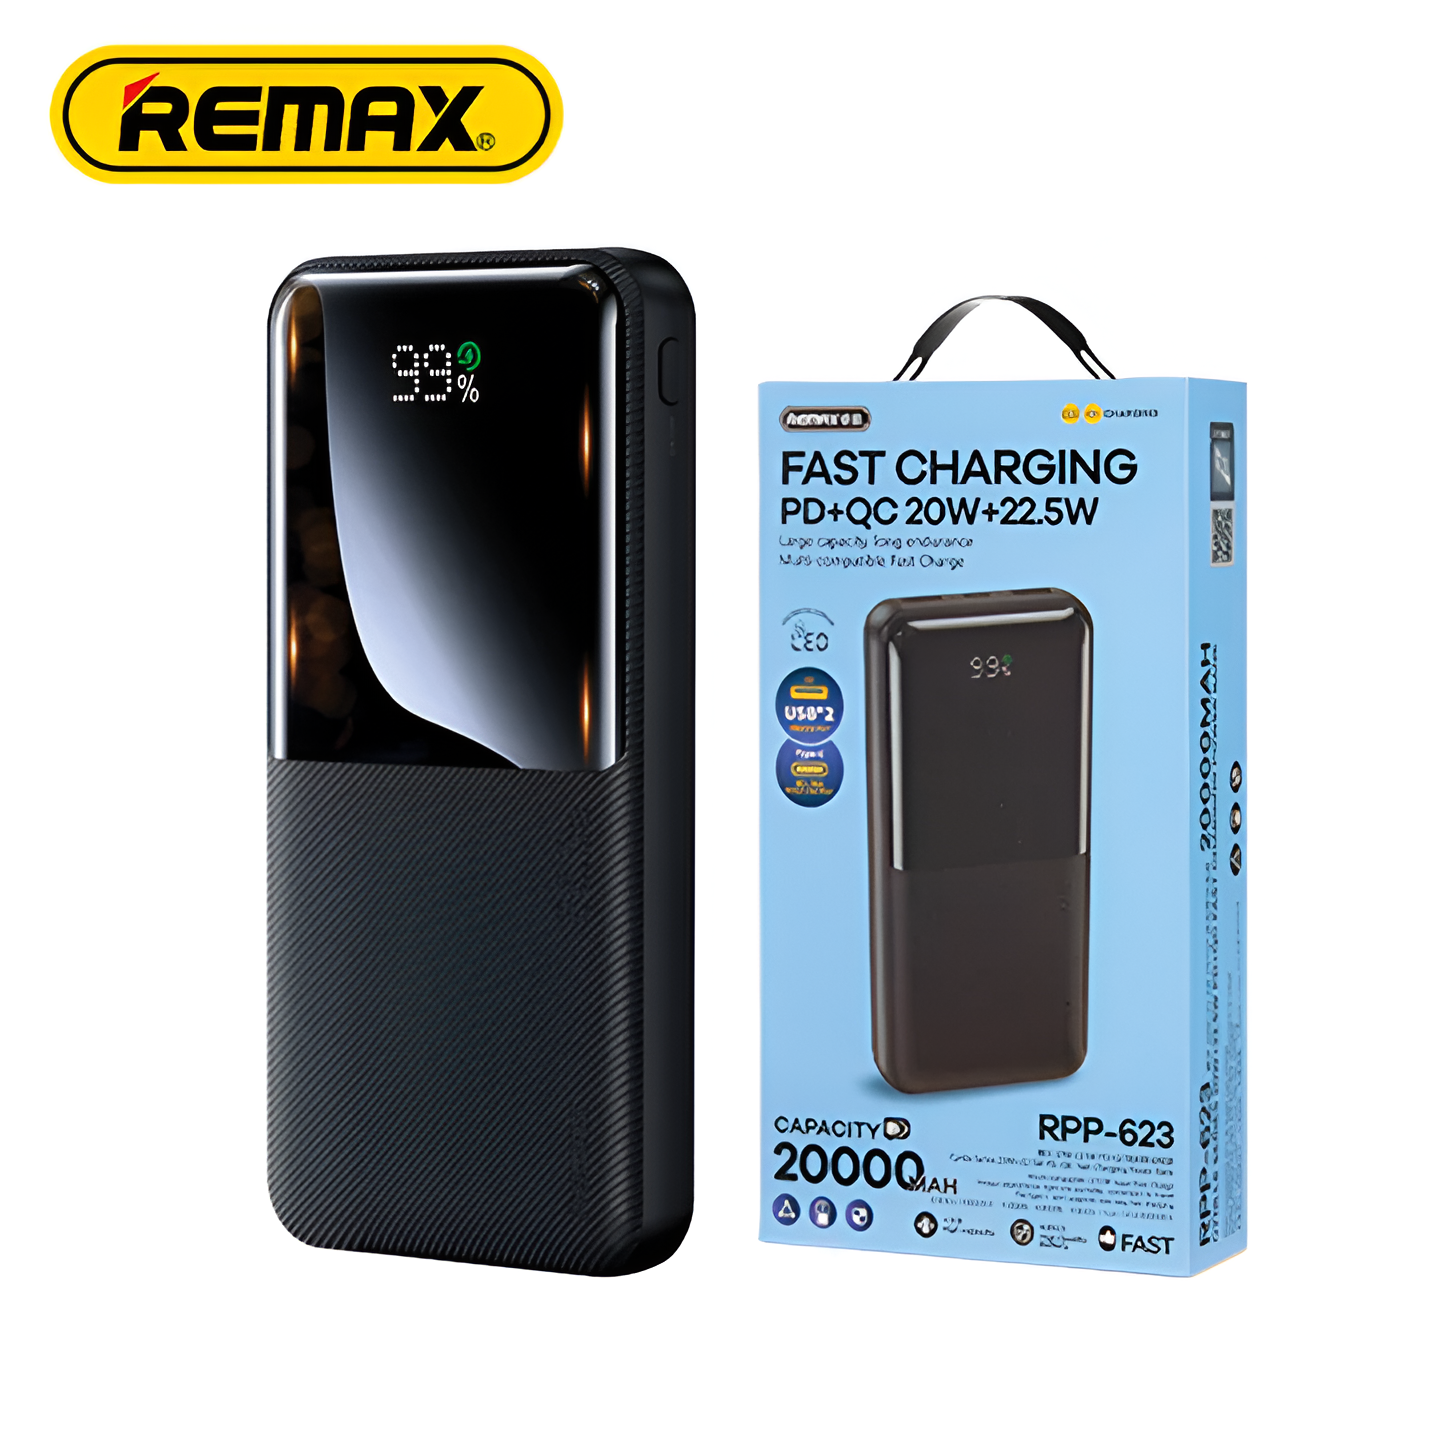 Power bank remax cynlle rpp-623 20w+22.5w pd/qc fast charge 20000mah (crni)